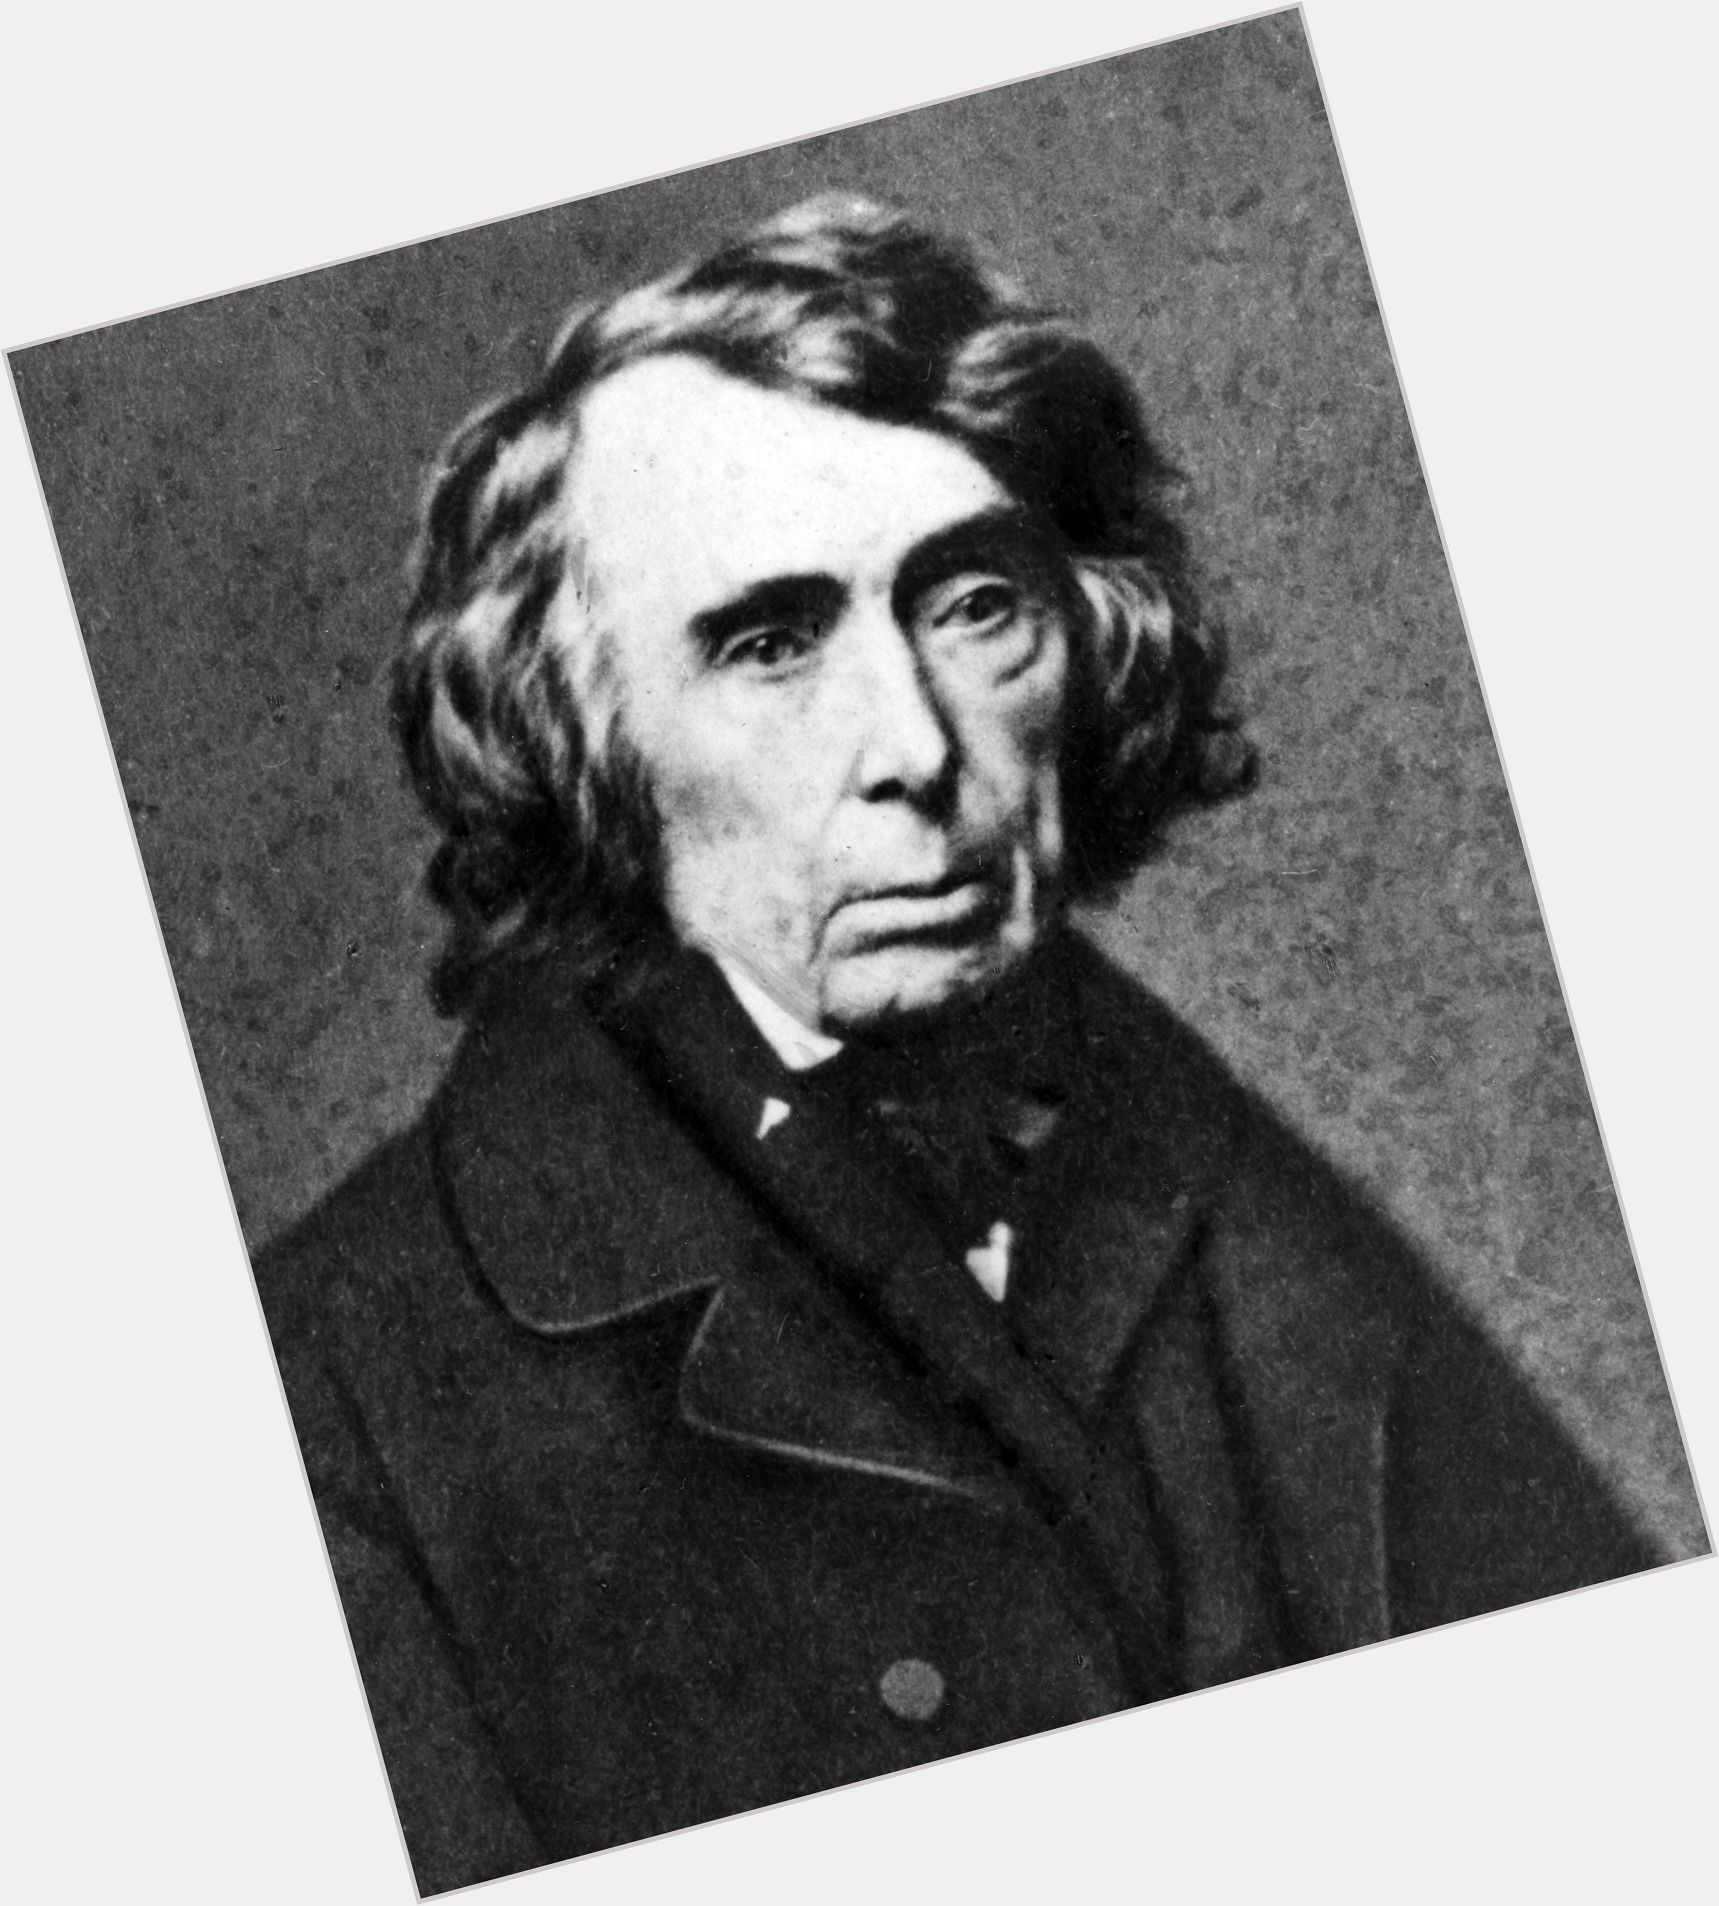 <a href="/hot-men/roger-b-taney/where-dating-news-photos">Roger B Taney</a> Slim body,  salt and pepper hair & hairstyles